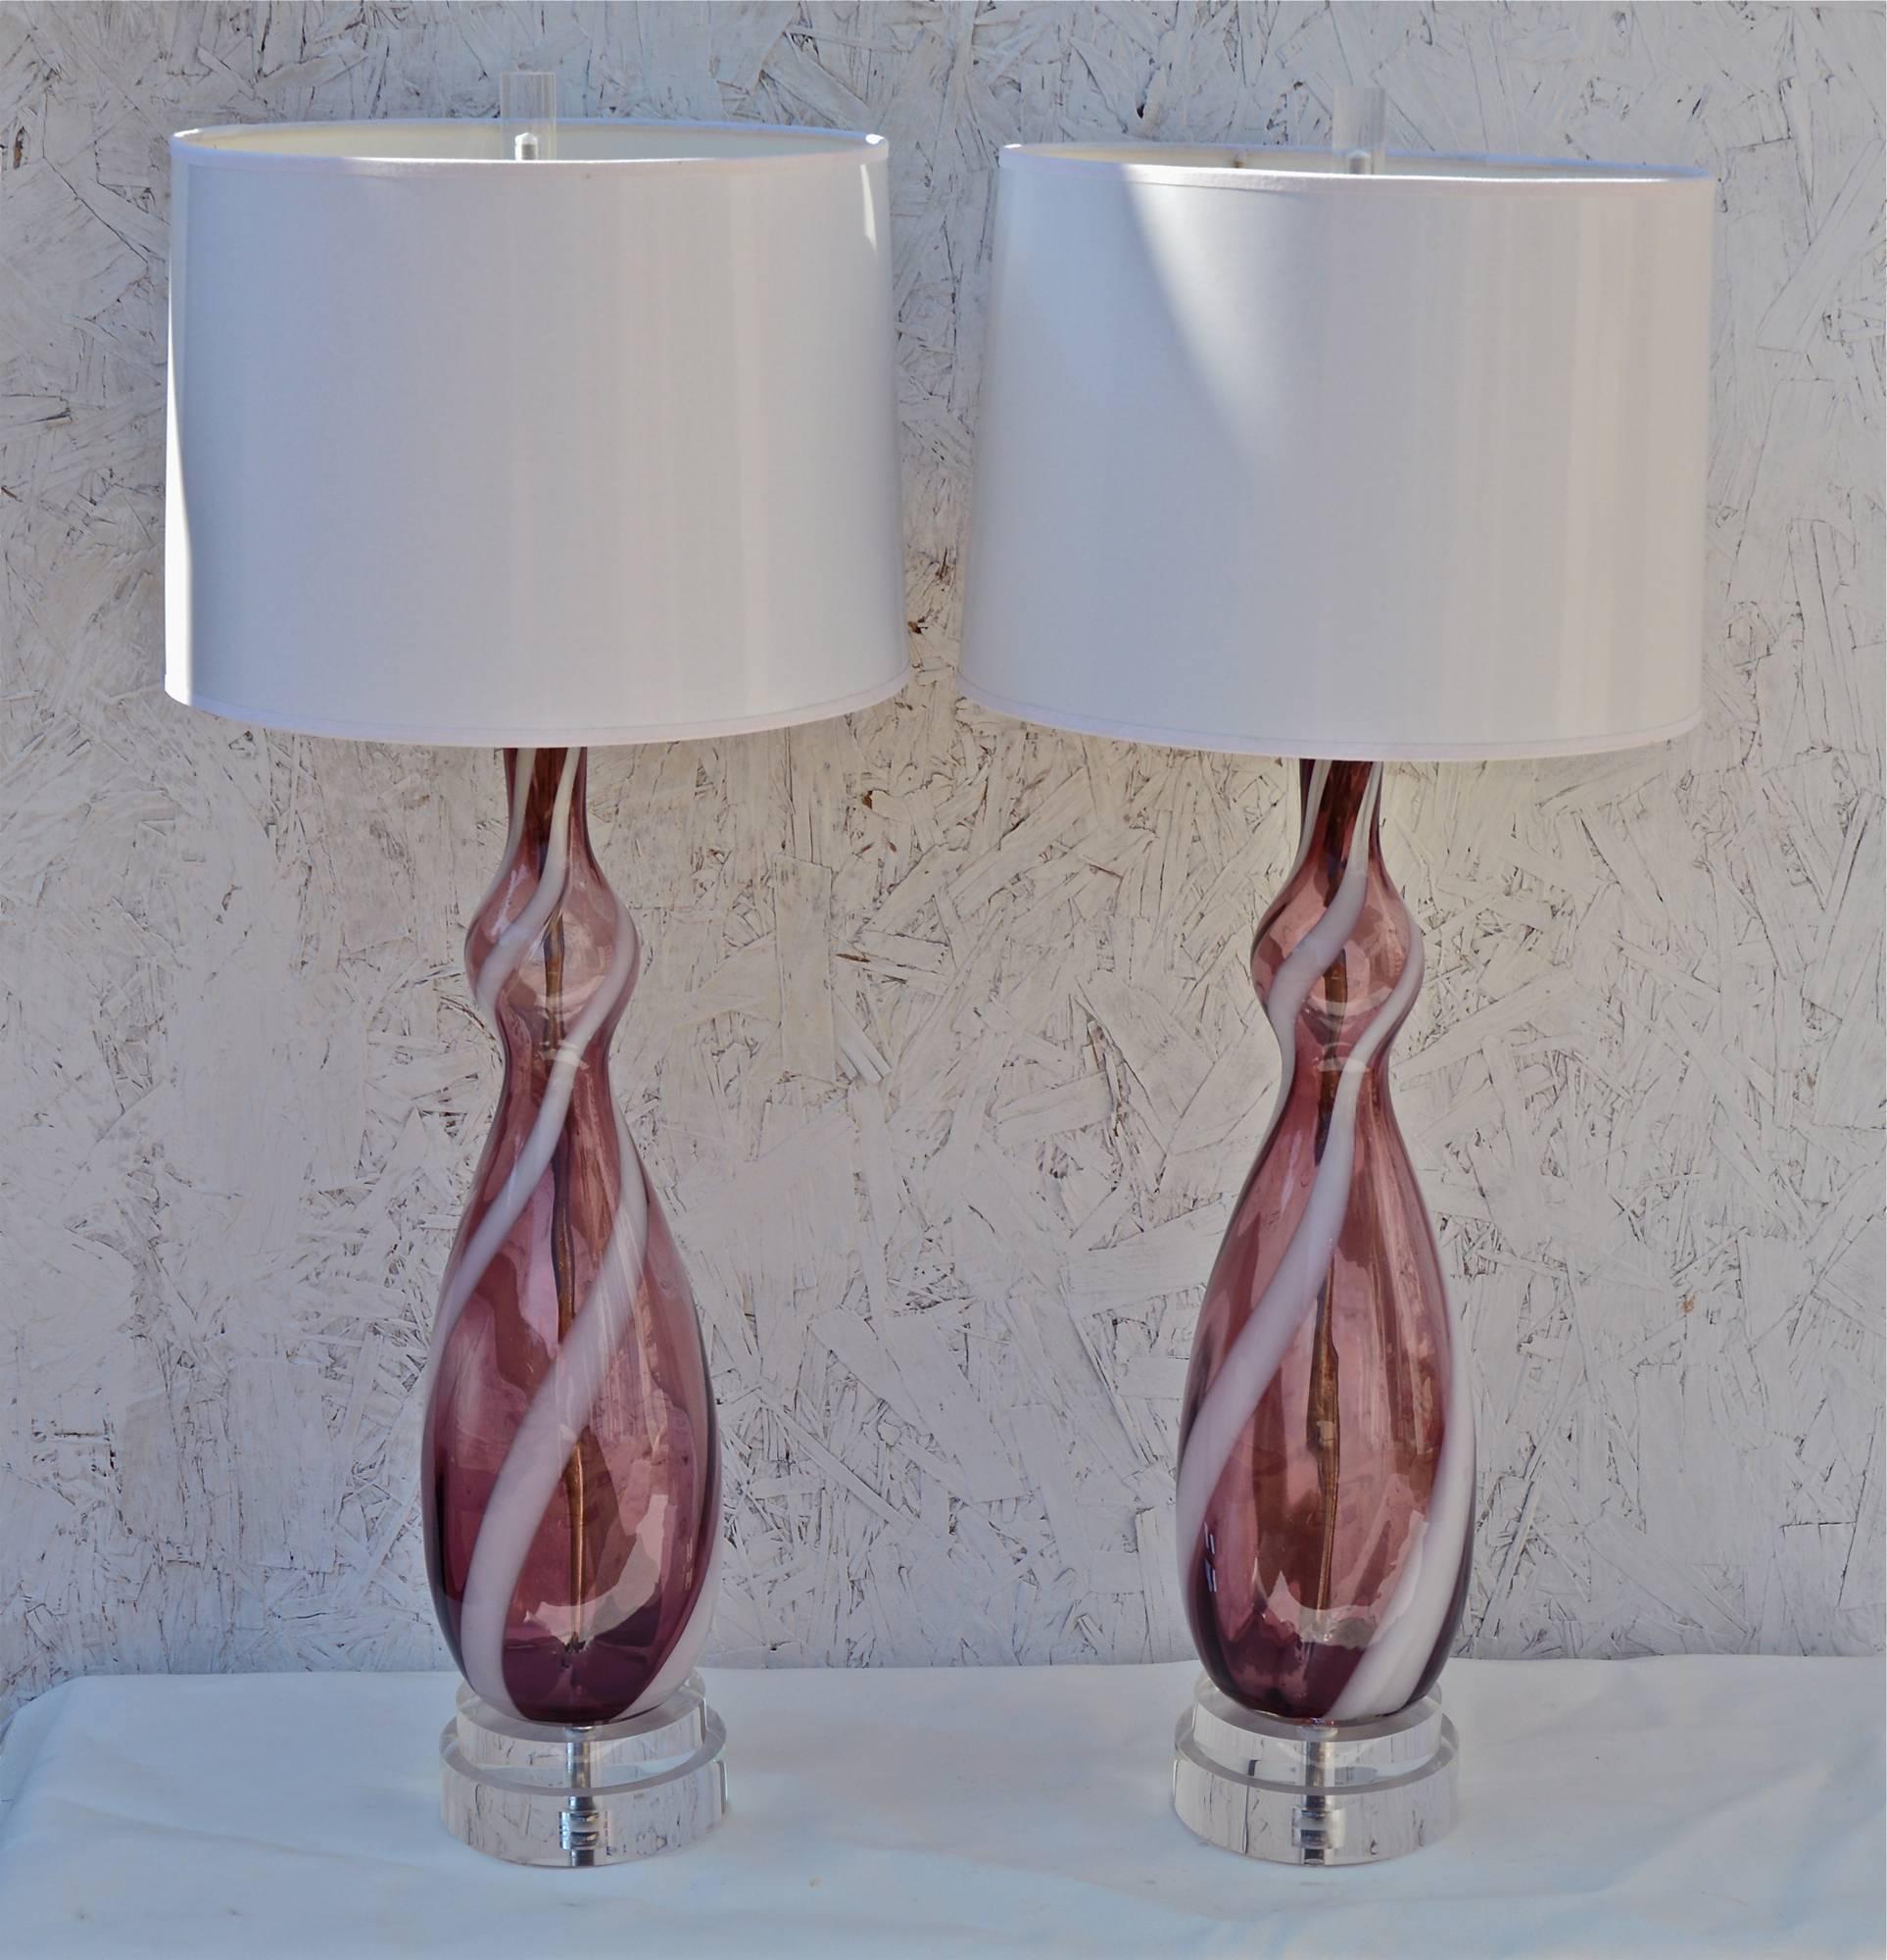 Pair of Mid 20th Century Italian murano glass lamps of light aubergine having applied white ribbon swirls. The matched pair of purple glass forms are mounted on custom double stack lucite bases. Nickel double clusters up top for the works. Lamps